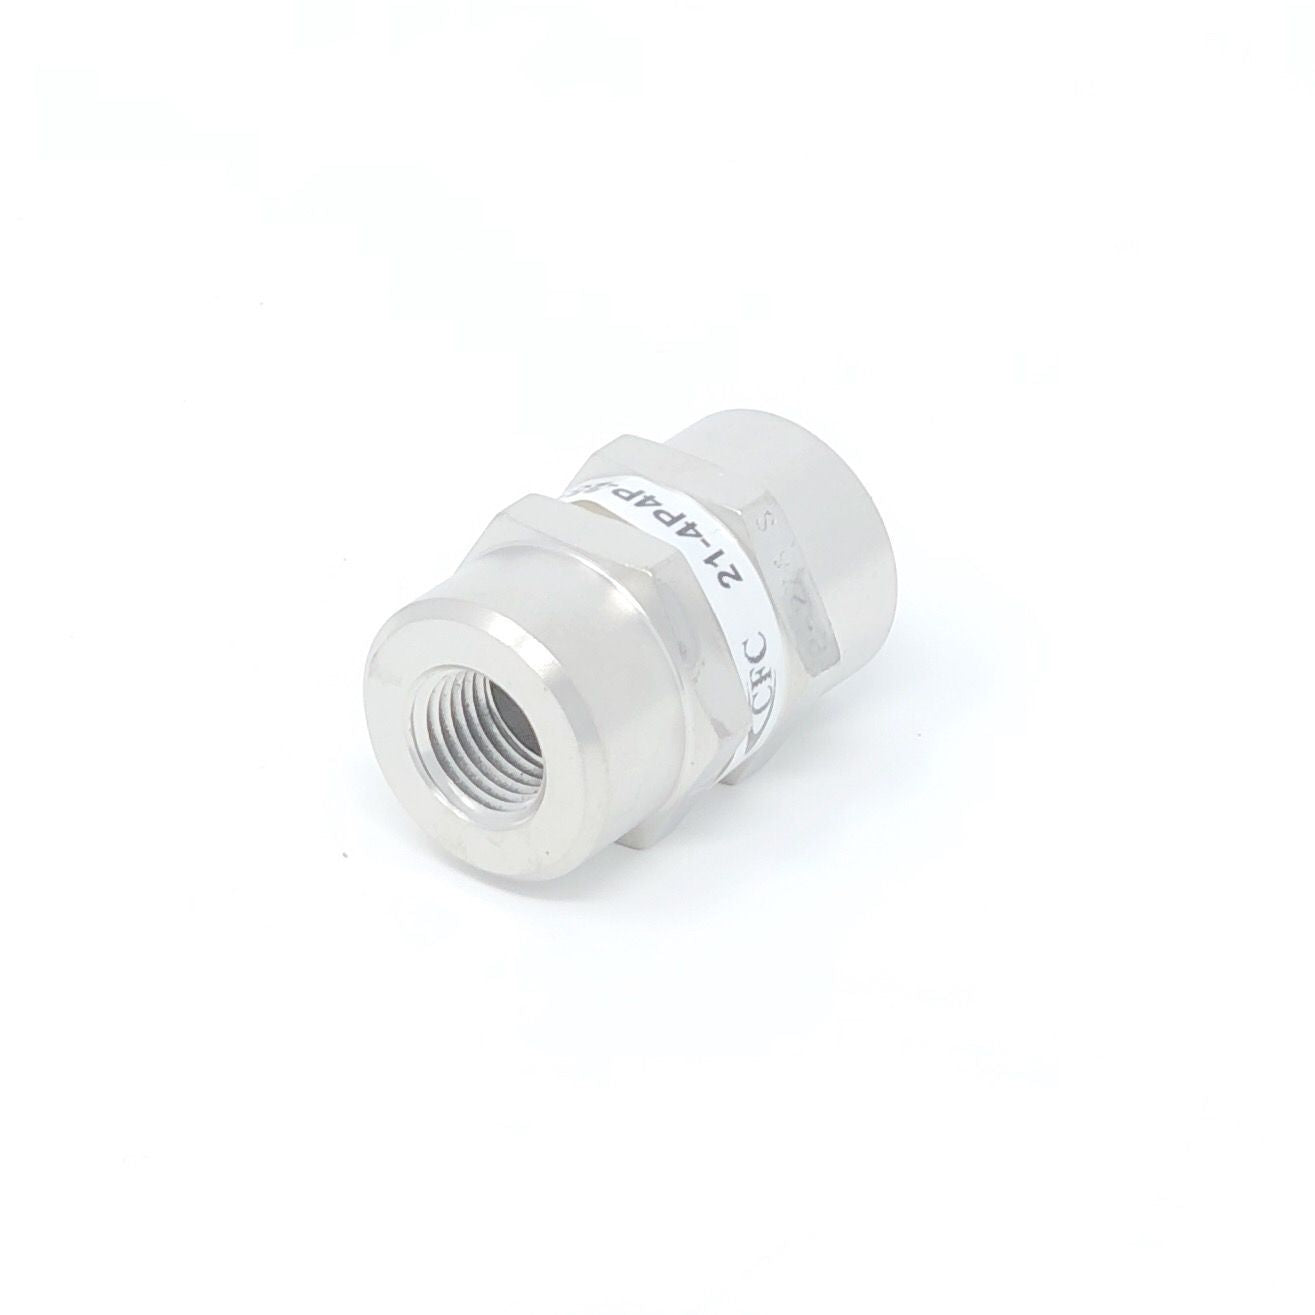 21-8M8M-40S : Chase High Pressure Inline Filter, 3000psi, #8 SAE (1/2"), 40 Micron, No Visual Indicator, With Bypass